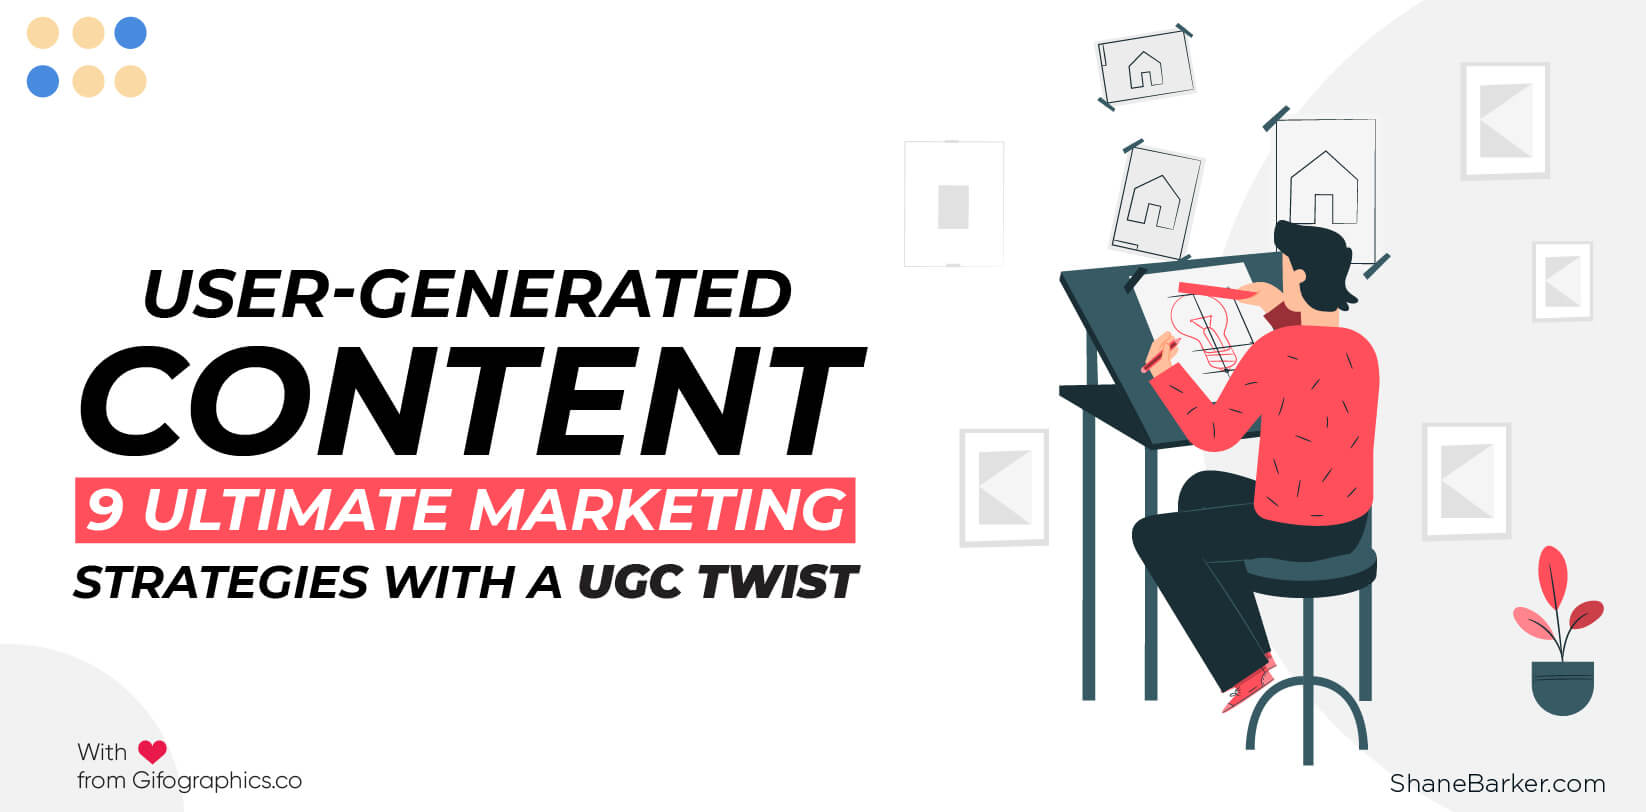 User-Generated Content: 9 Ultimate Marketing Strategies with a UGC Twist